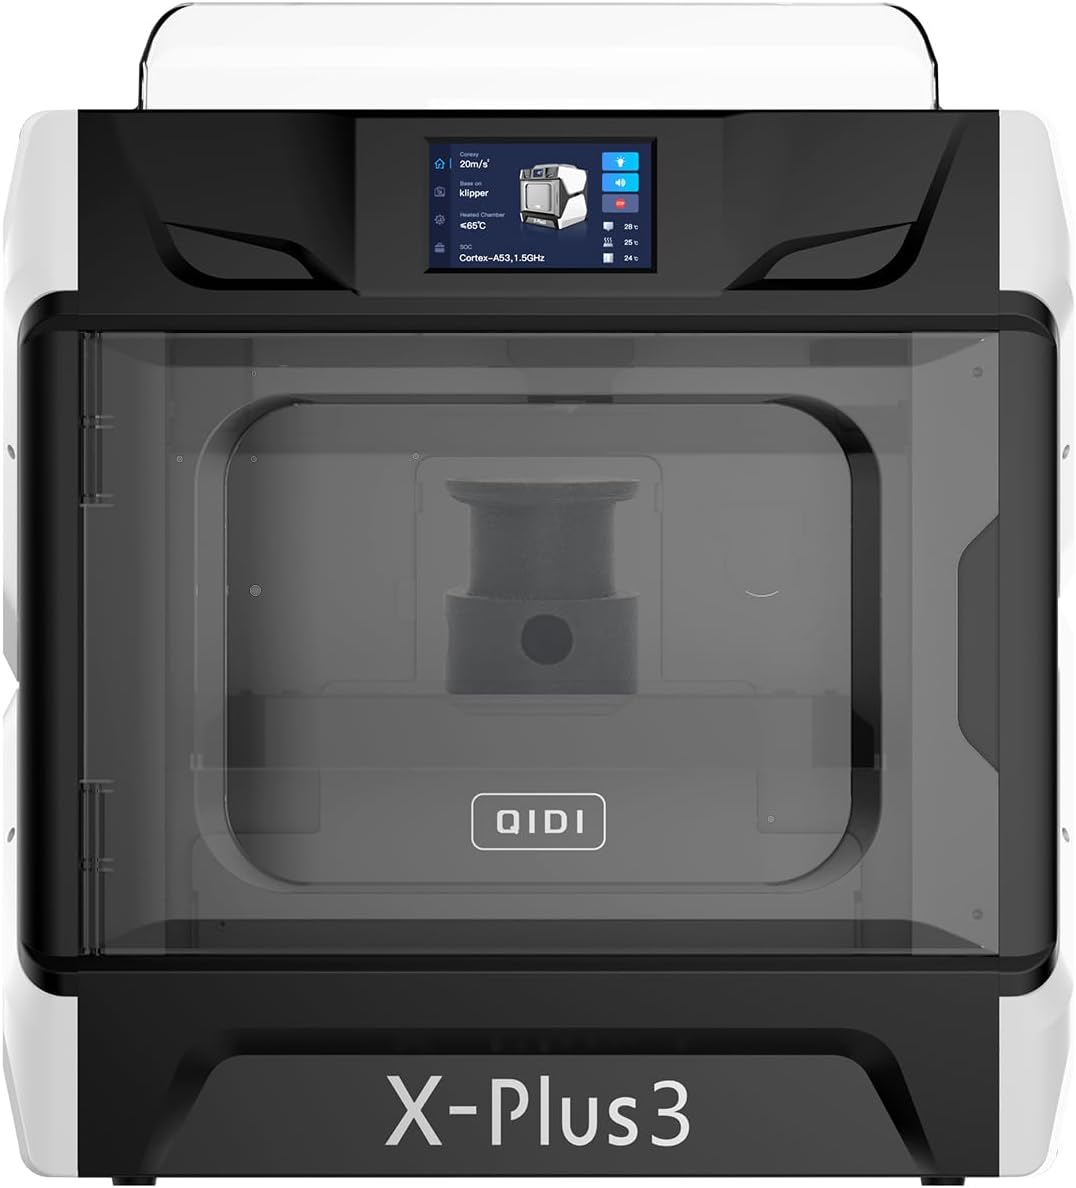 r-qidi-technology-x-plus3-3d-printers-fully-upgrade-600mms-industrial-grade-high-speed-3d-printer-acceleration-20000mms2 R QIDI TECHNOLOGY X-PLUS3 3D Printer Review